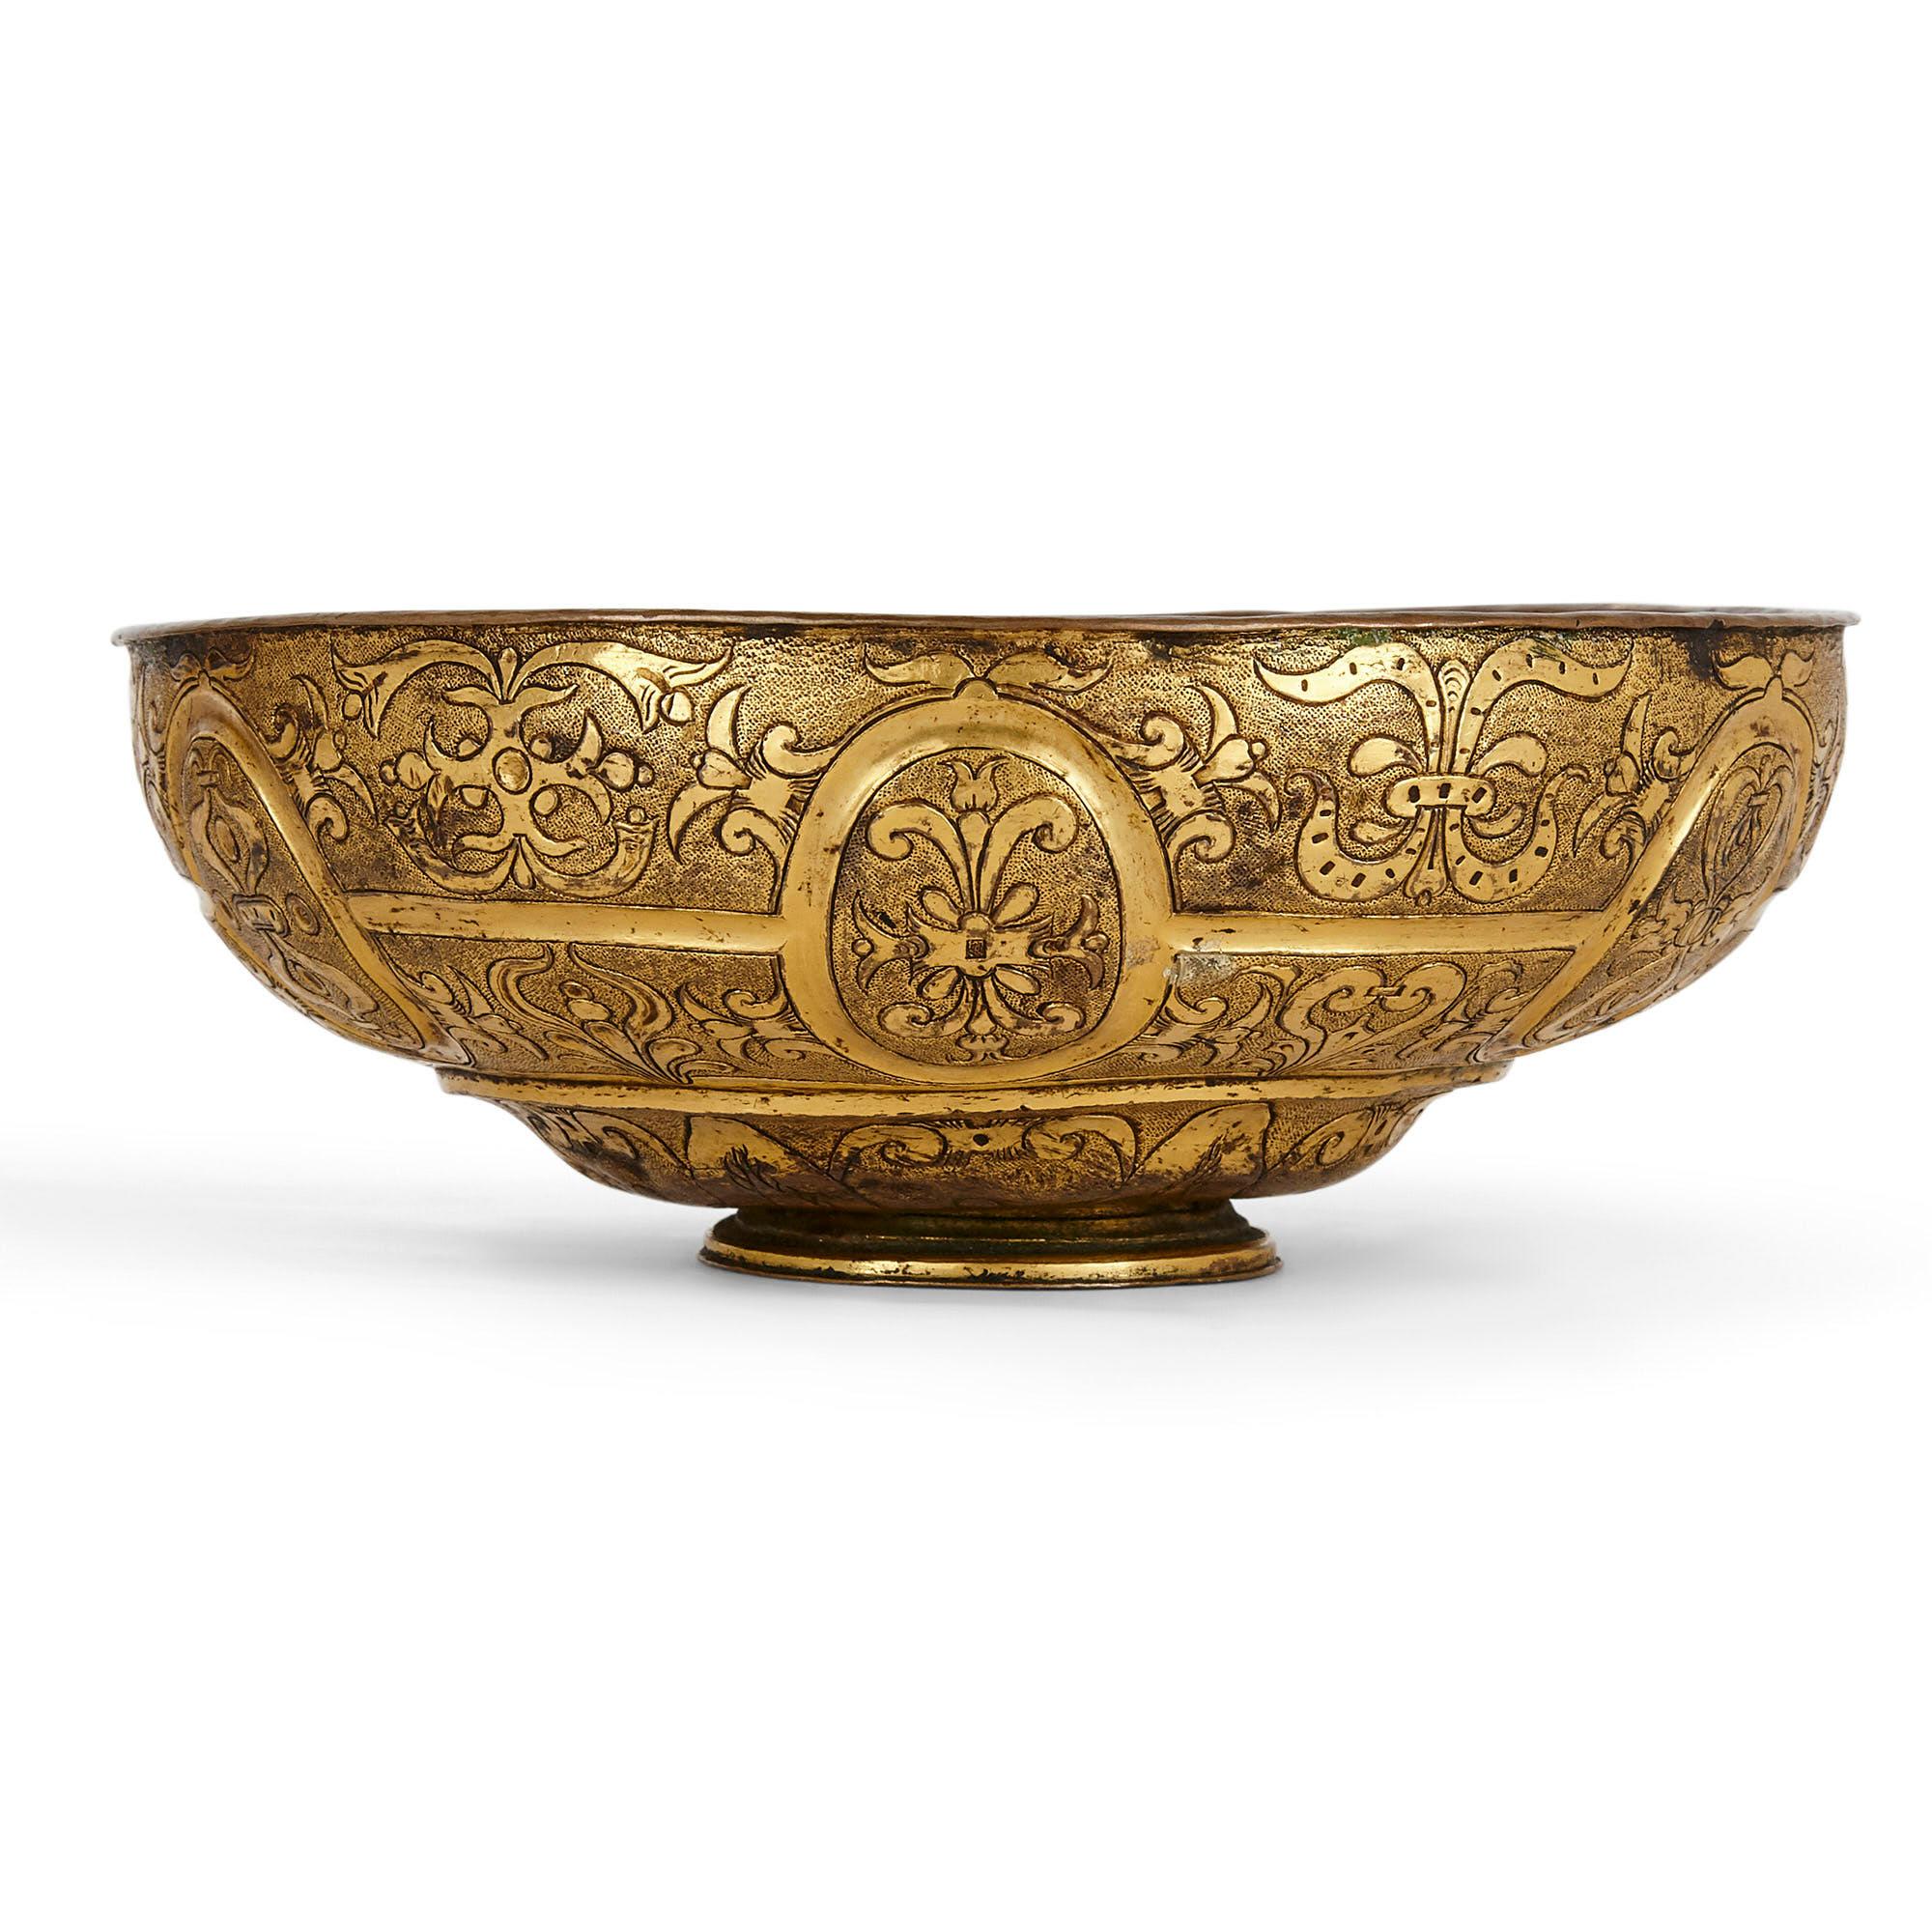 Pair of antique Baroque period Venetian gilt copper bowls
Italian, 17th century
Dimensions: height 7cm, diameter 19cm

This rare pair of 17th century Venetian bowls were exquisitely crafted from gilt copper and feature Fine engraved surface